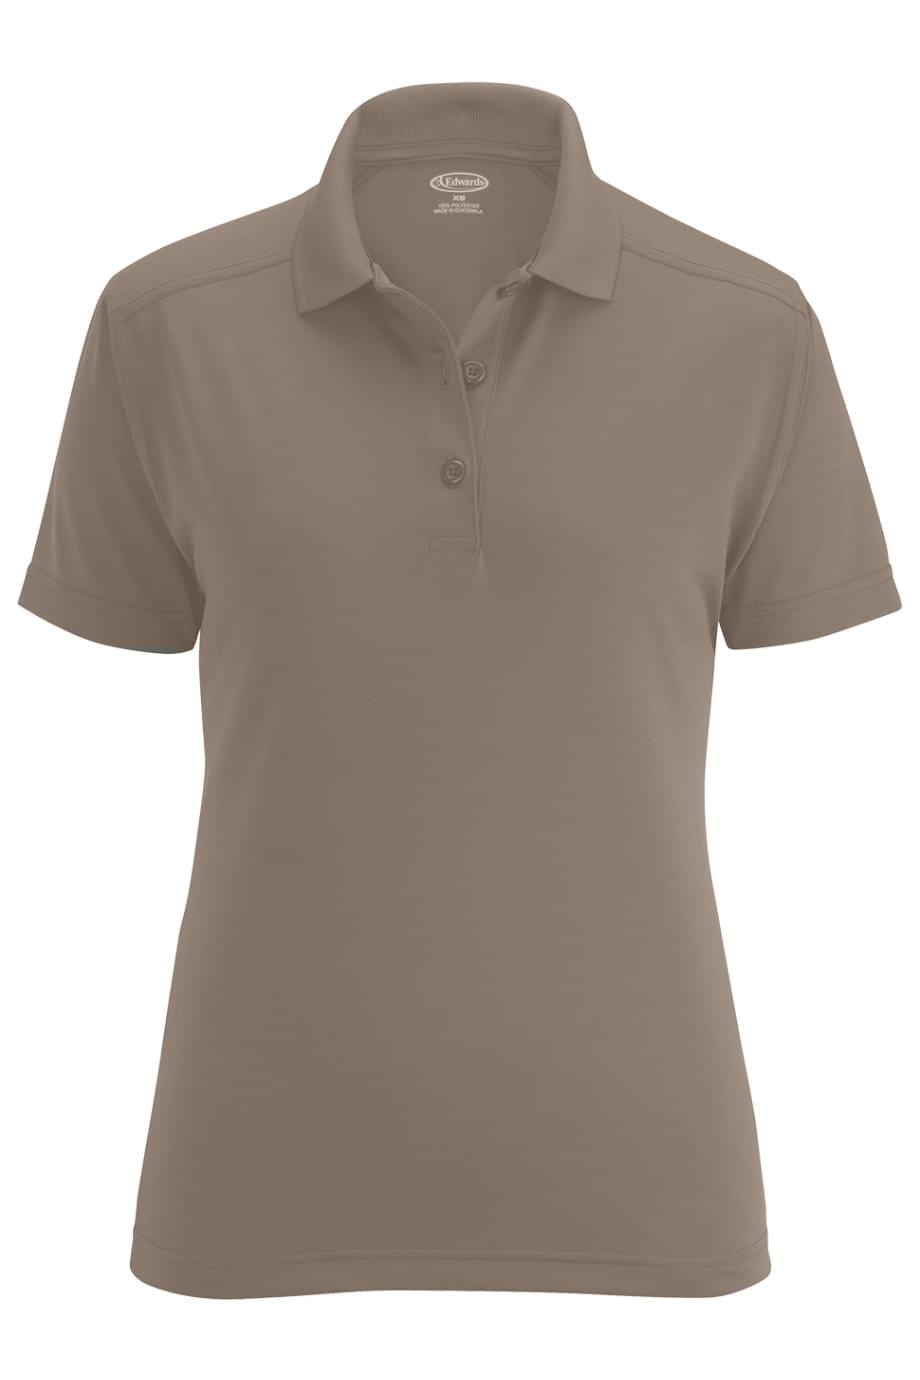 Edwards Snag-Proof Polo 5512 for Women Silver Tan